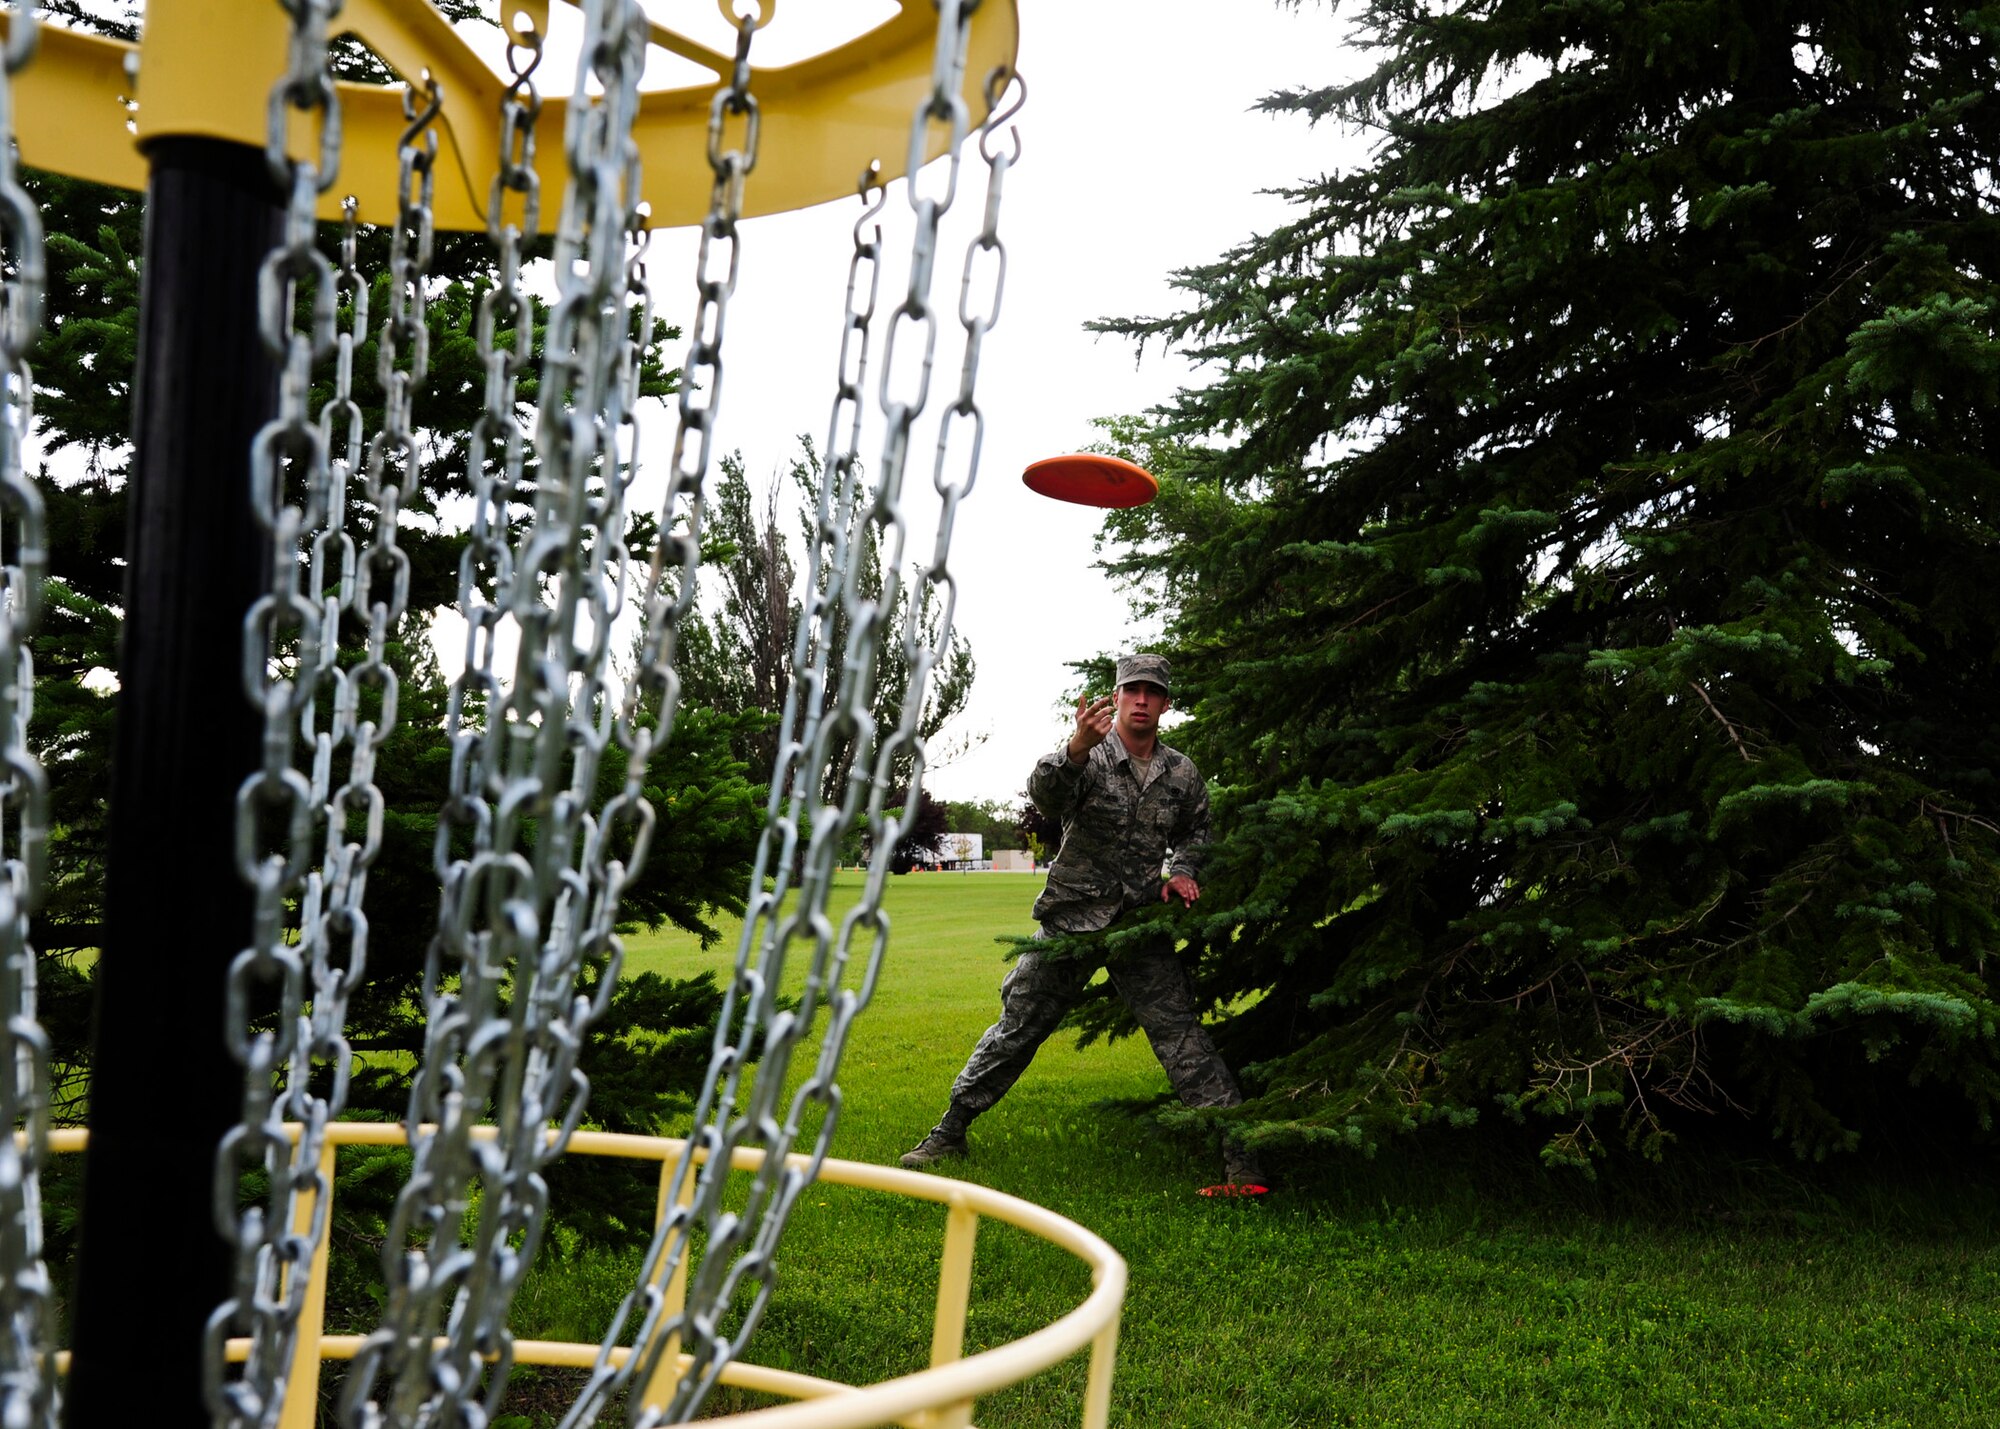 Airman 1st Class Ian Bush, 319th Security Forces Squadron information manager, tosses a disc July 17, 2015 at the Grand Forks Air Force Base disc golf course. Bush has played disc golf for several years. Bush has been organizing events on base in an attempt to make Airmen aware of the disc golf course and its availability to Airmen and their families. (U.S. Air Force photo by Airman 1st Class Ryan Sparks/released)